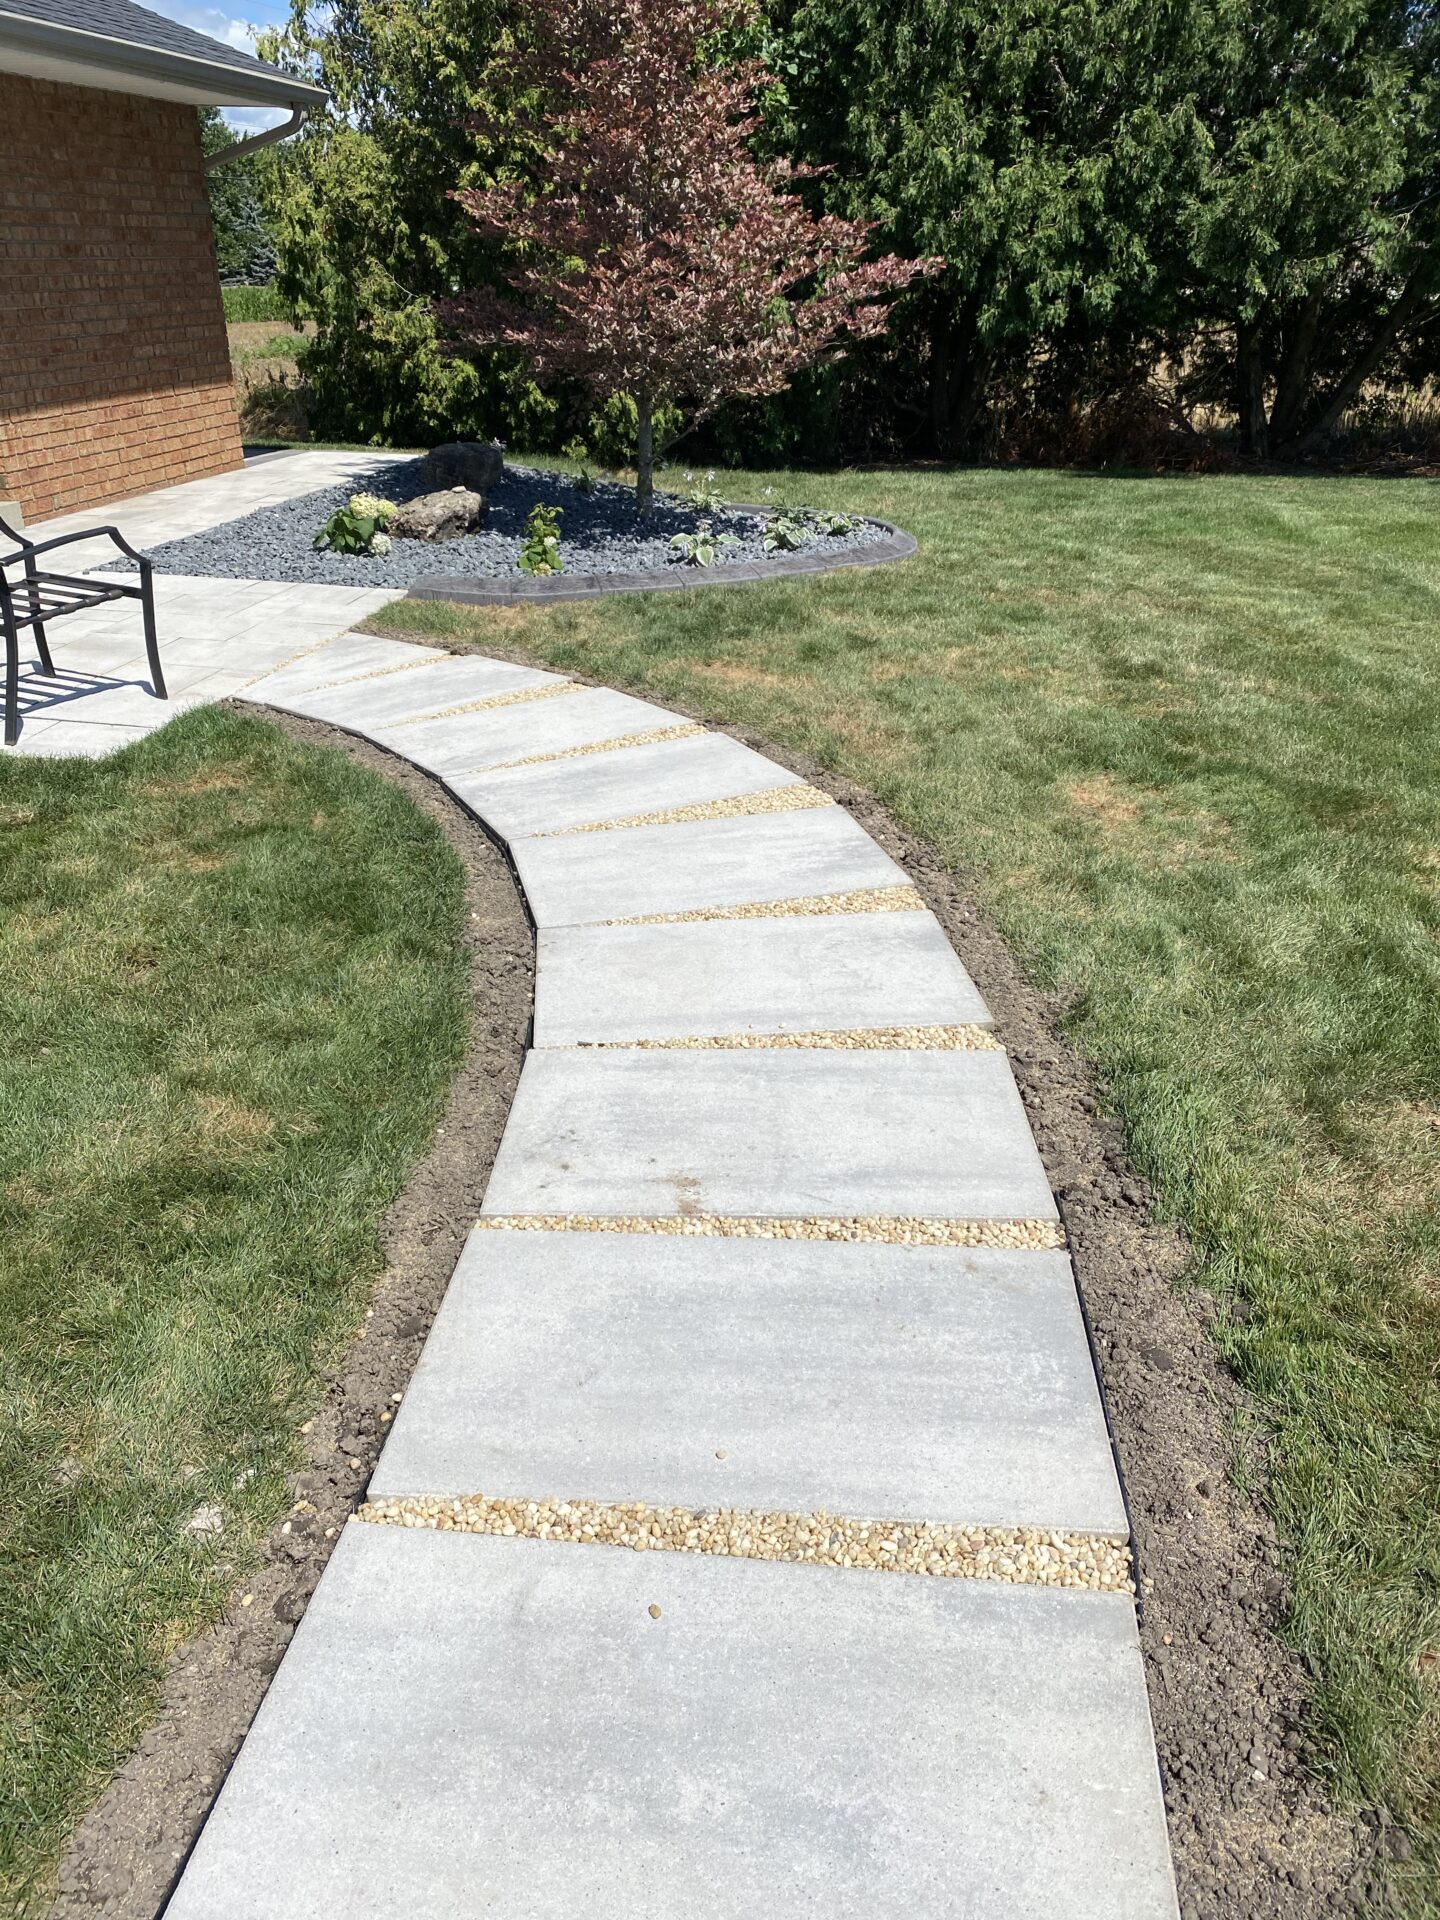 This image shows a curved concrete pathway with gravel inlays, surrounded by freshly mown grass leading towards a patio area with landscaping.